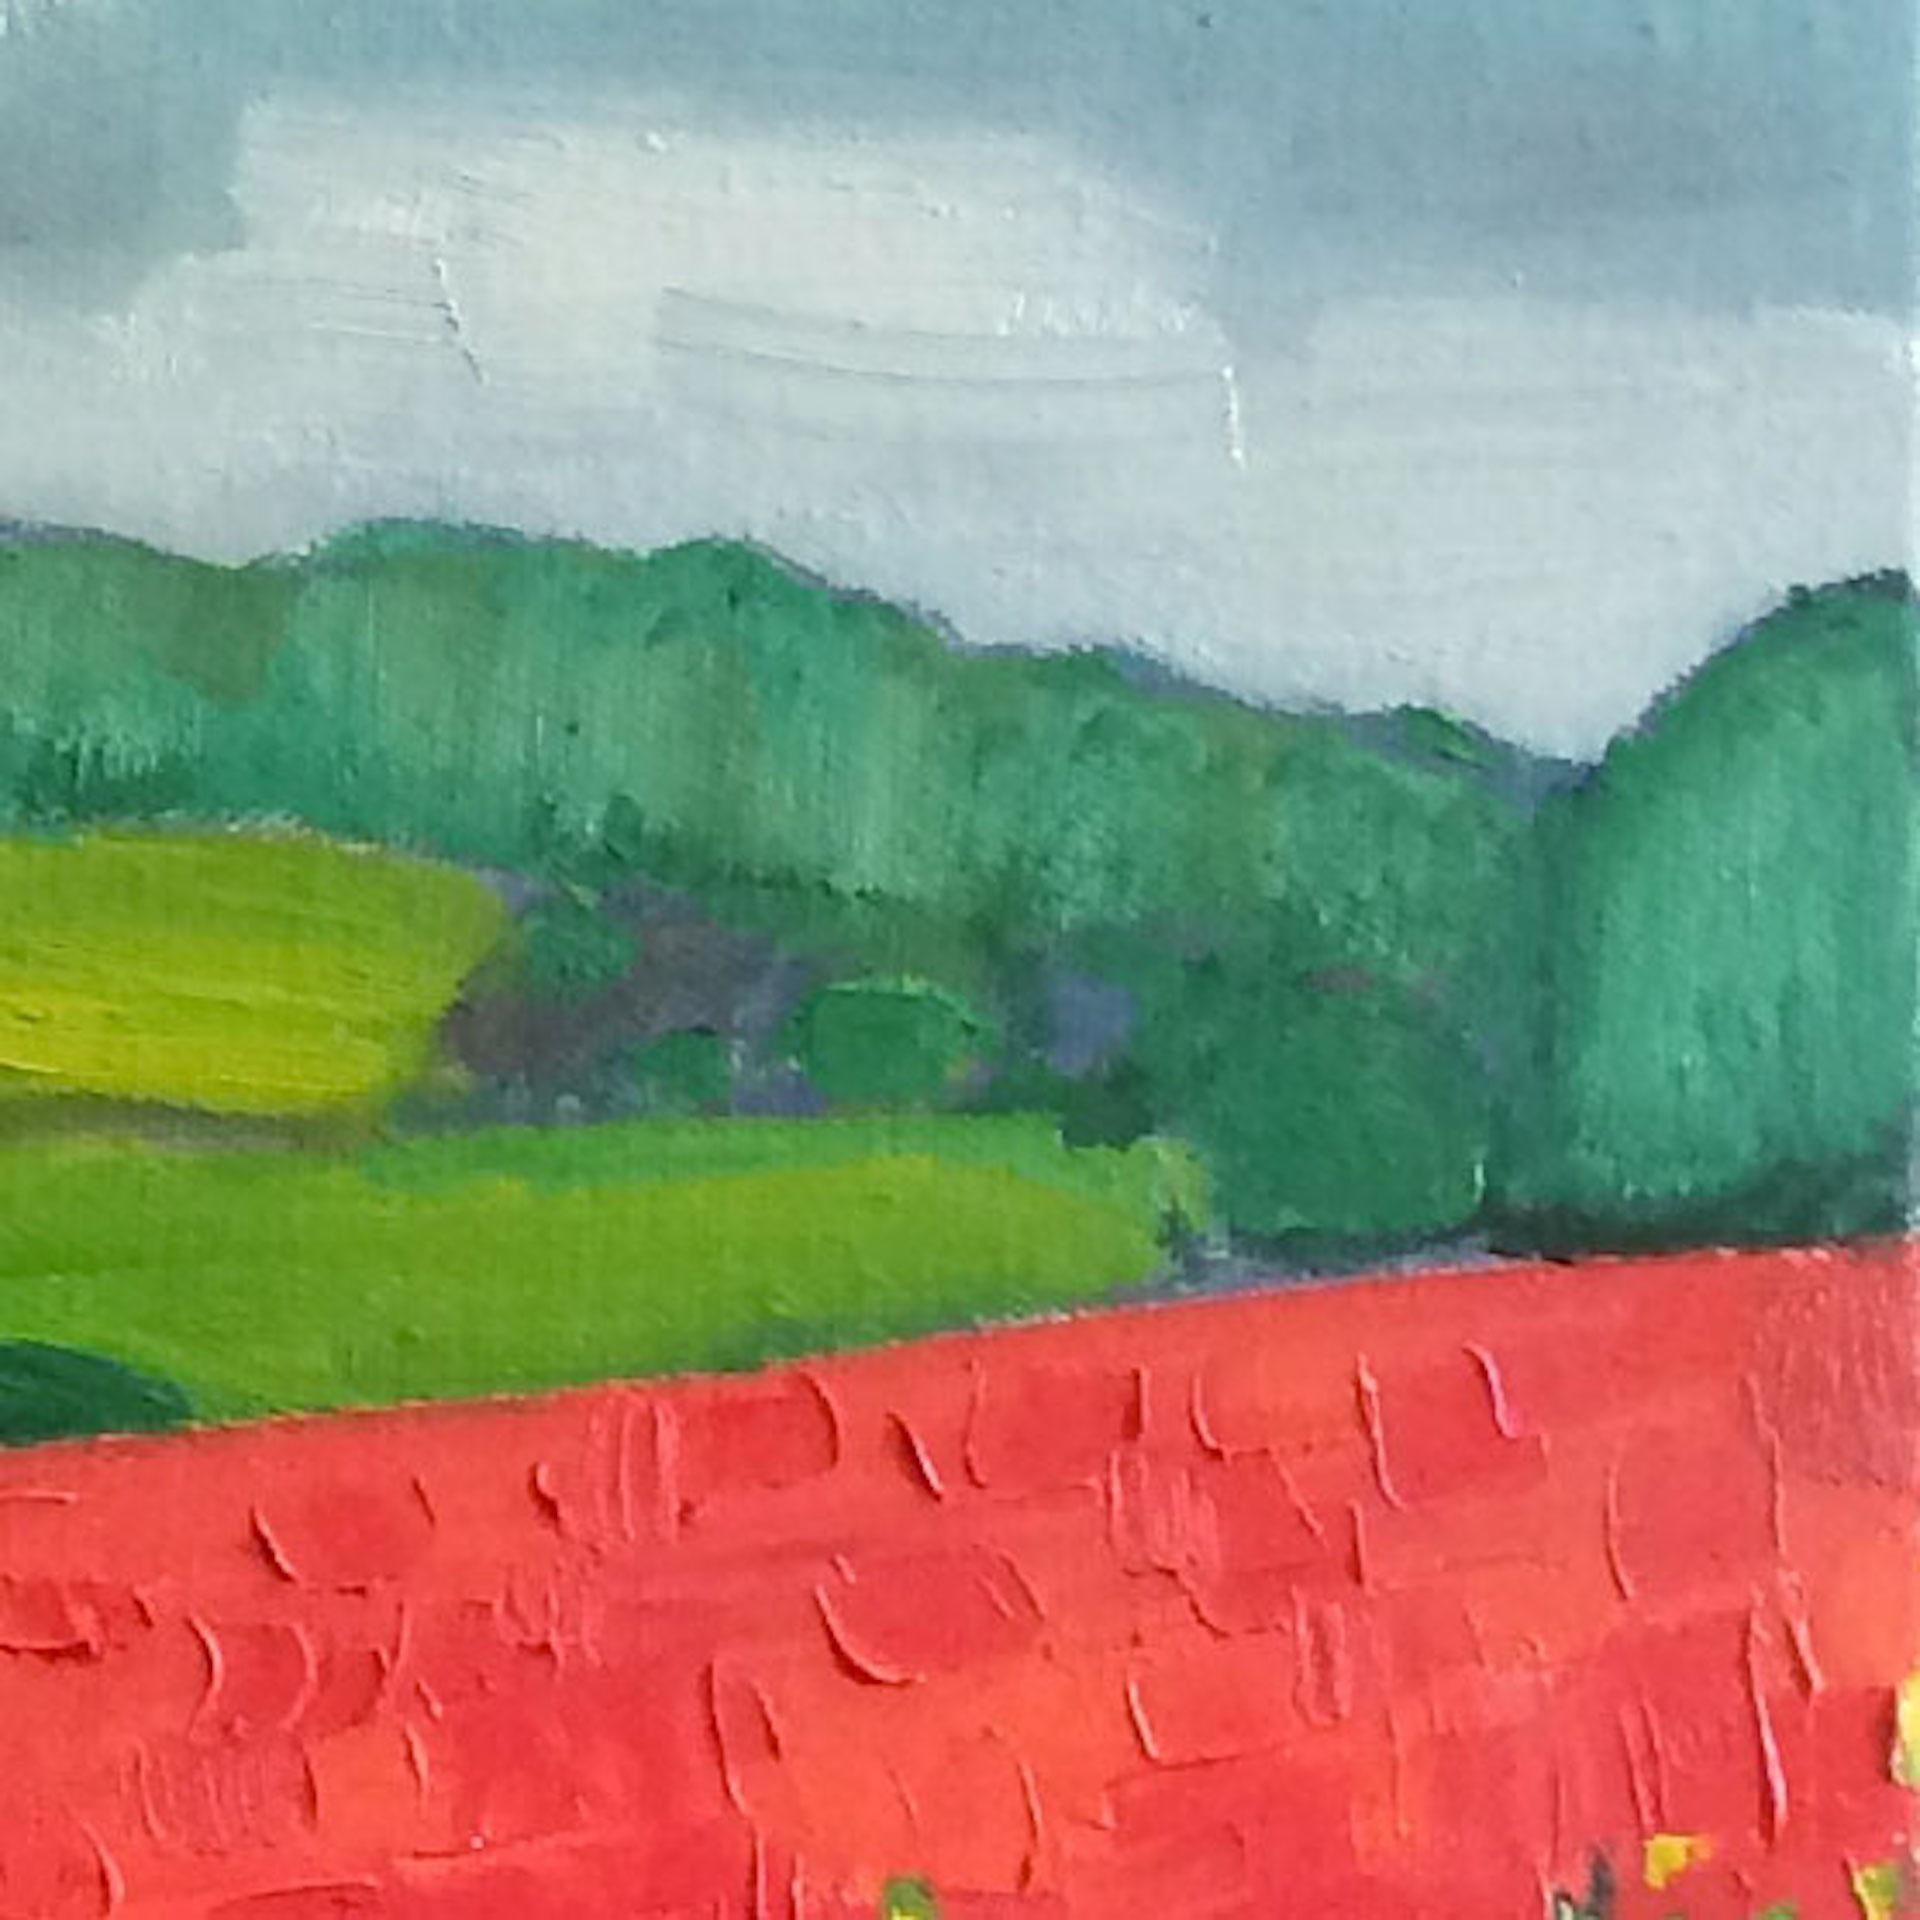 Eleanor Woolley
Poppies Near Naunton 2
Original Painting
Oil Paint on Canvas
Canvas Size: H 61cm x W 61cm x D 3.7cm
Signed
Sold Unframed
Ready to Hang
(Please note that in situ images are purely an indication of how a piece may look).

Poppies near